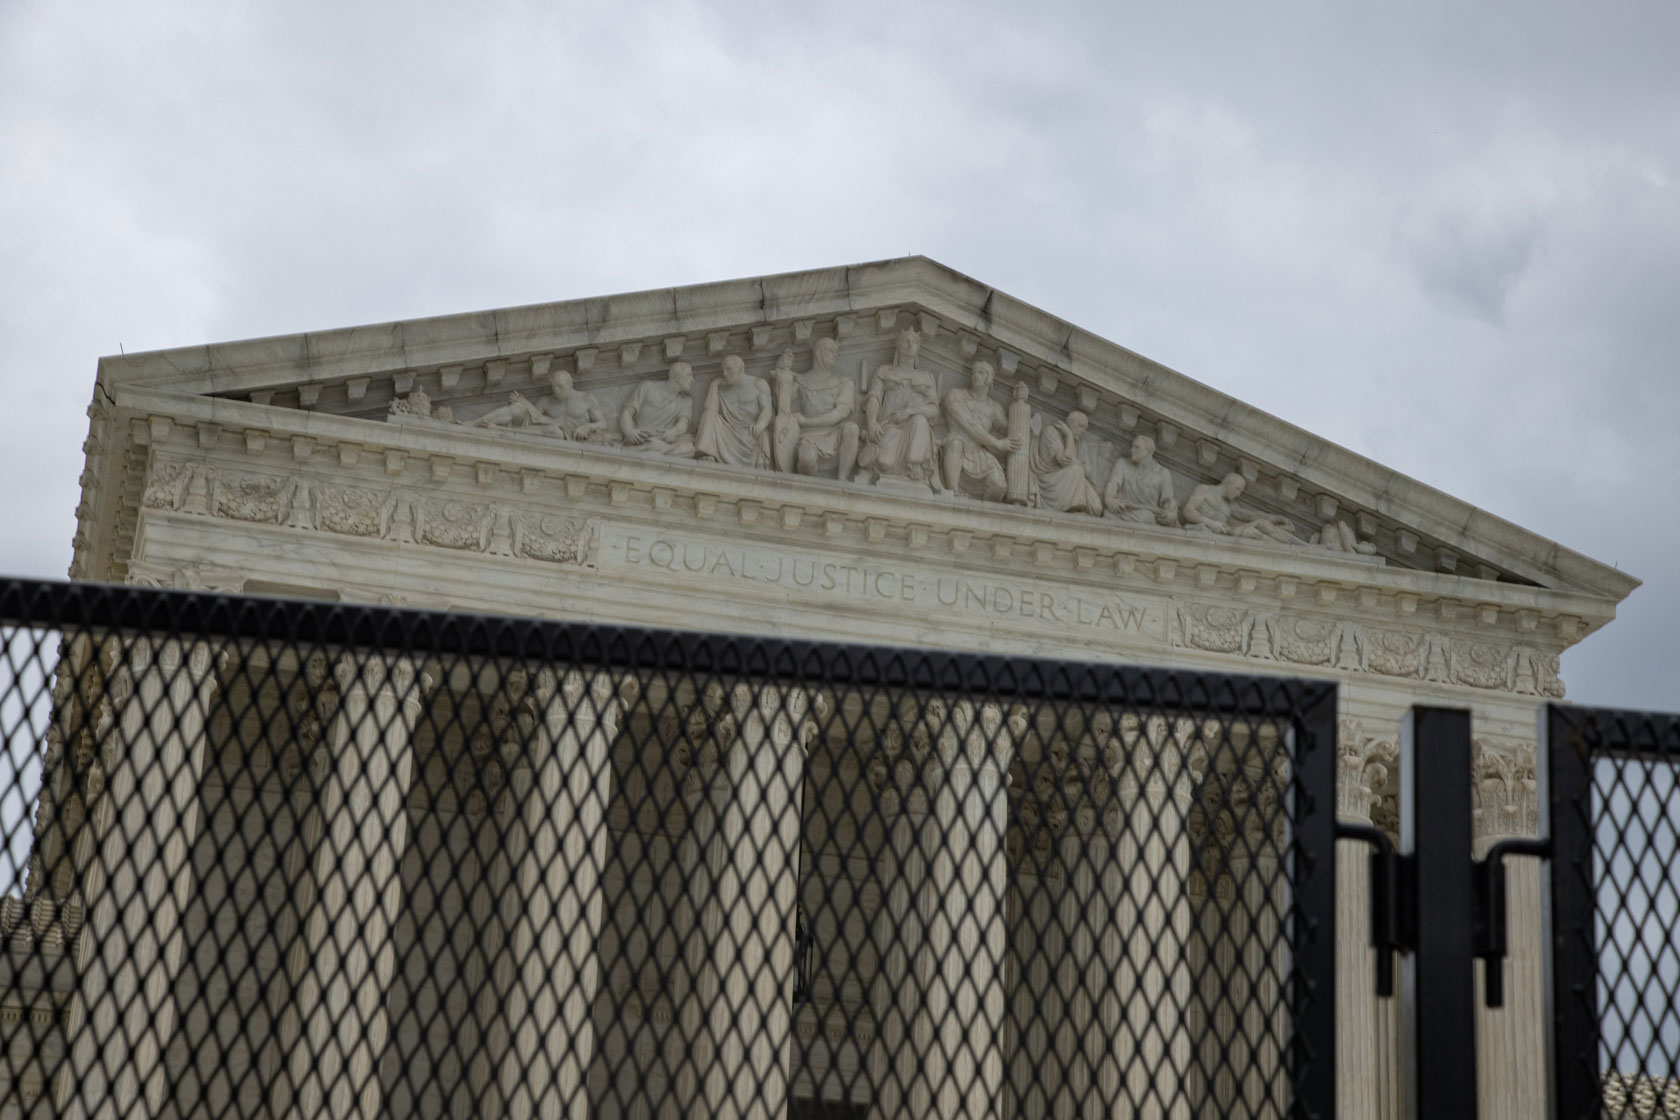 The Supreme Court in Washington, D.C. is seen behind fencing.